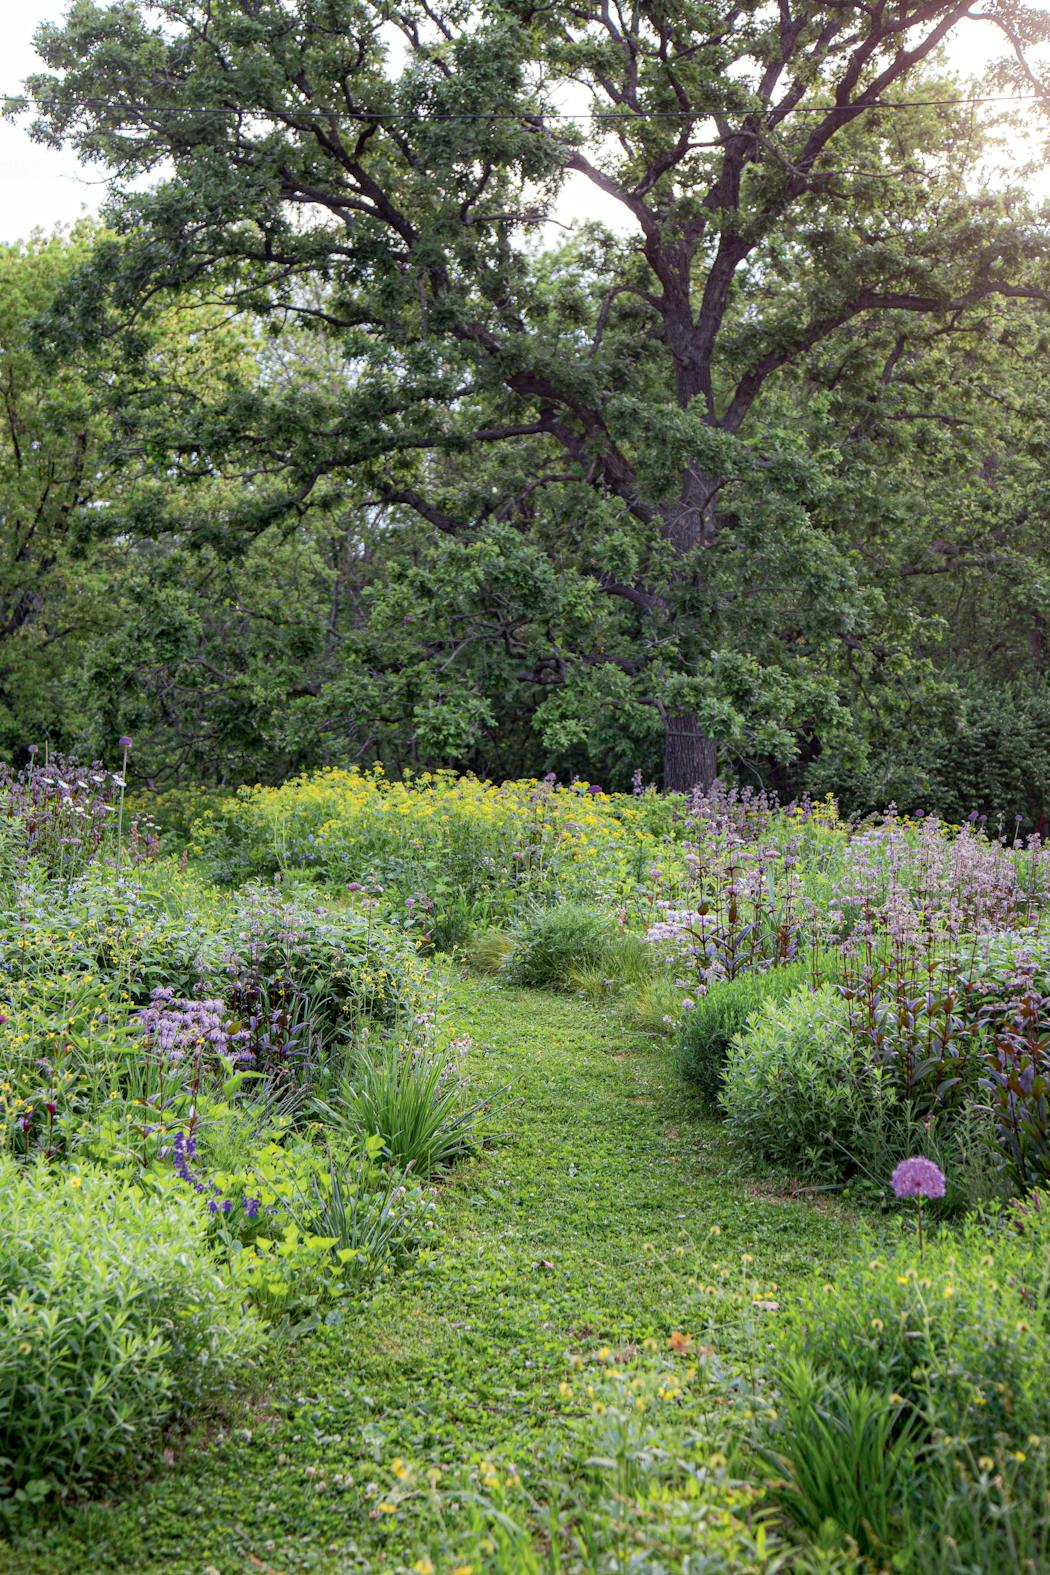 An example of a Kelly style naturalist garden as shown in the book “Field Guide to Outside Style.”